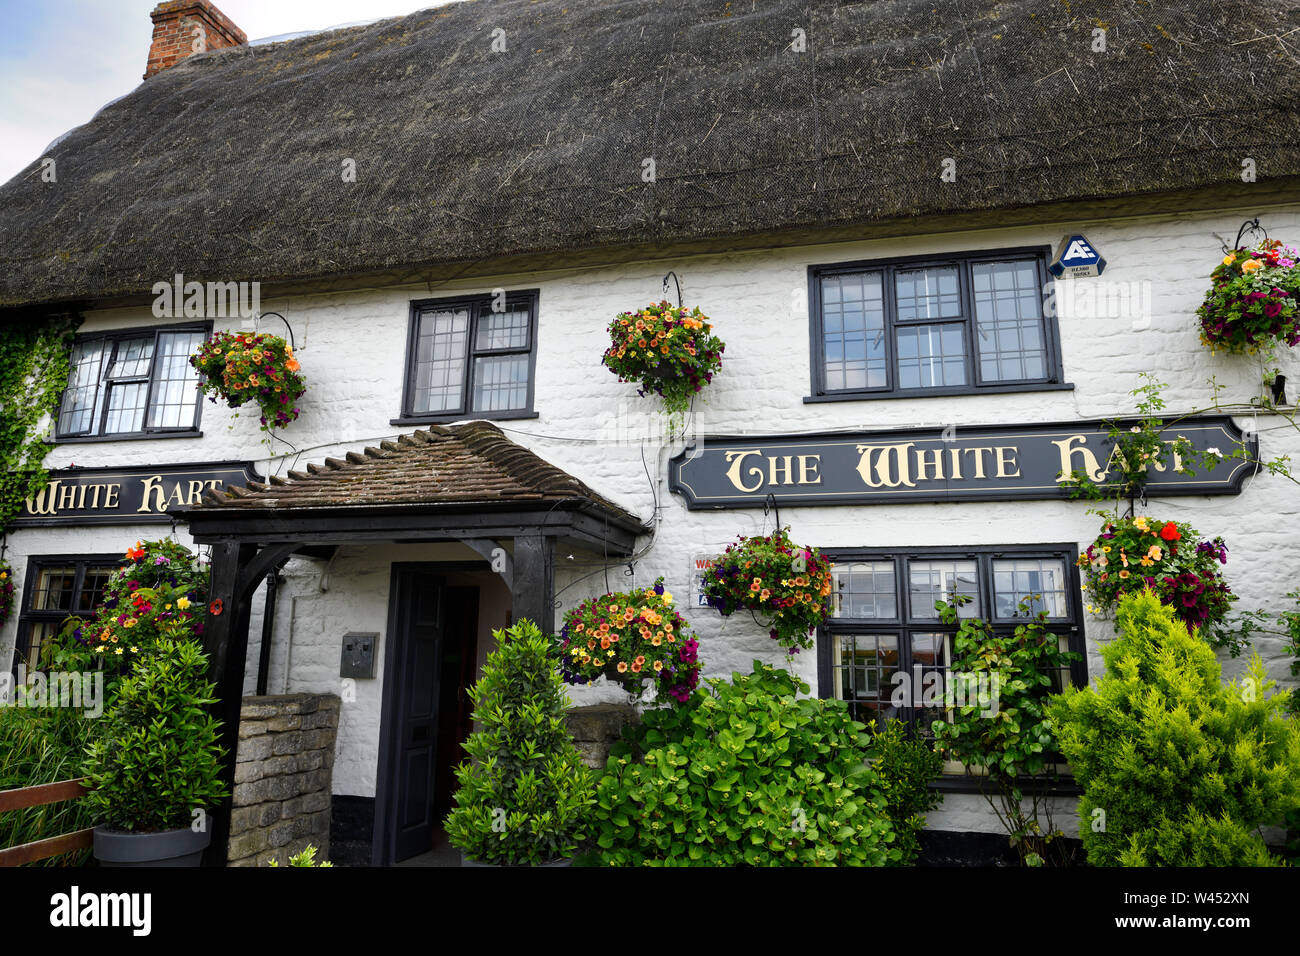 Facade of the White Hart Pub and Inn in Wroughton England with flower garden and thatched roof Stock Photo